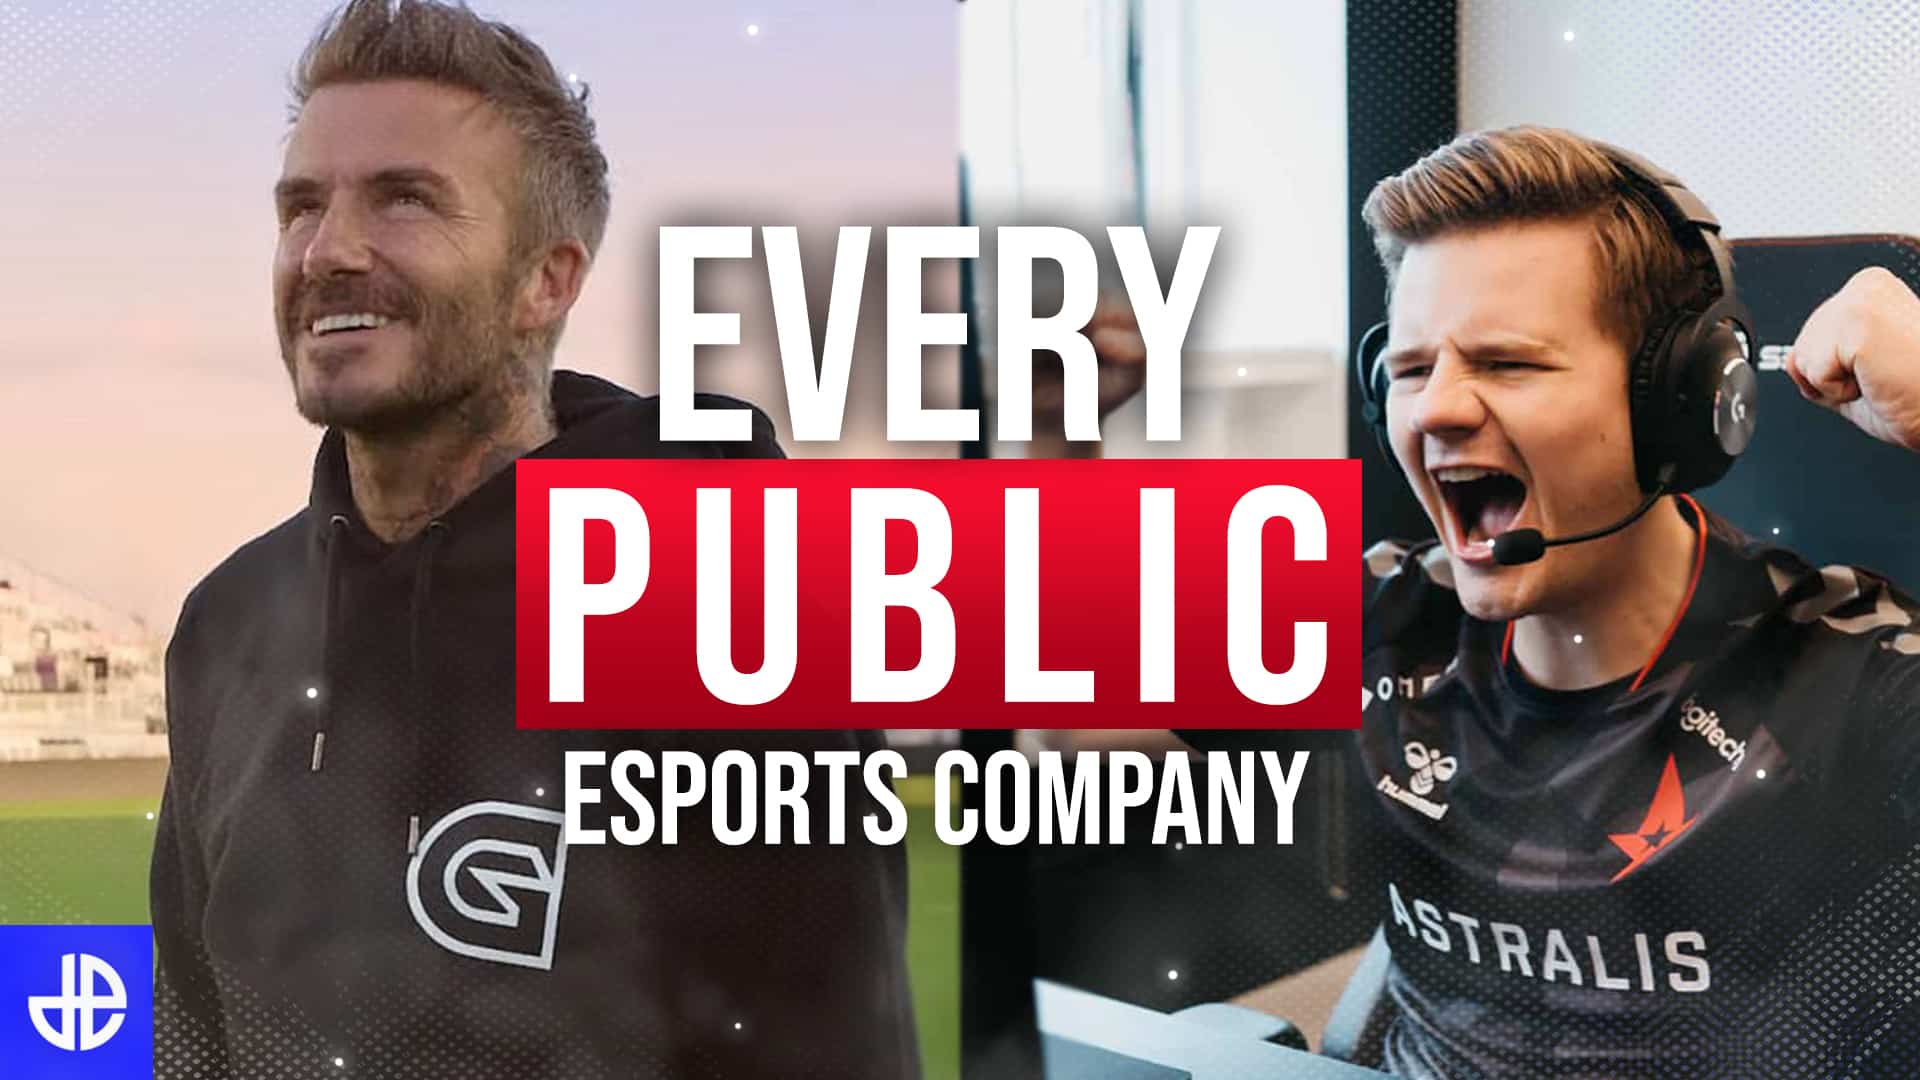 Games & Esports Experience Acquisition Corp.